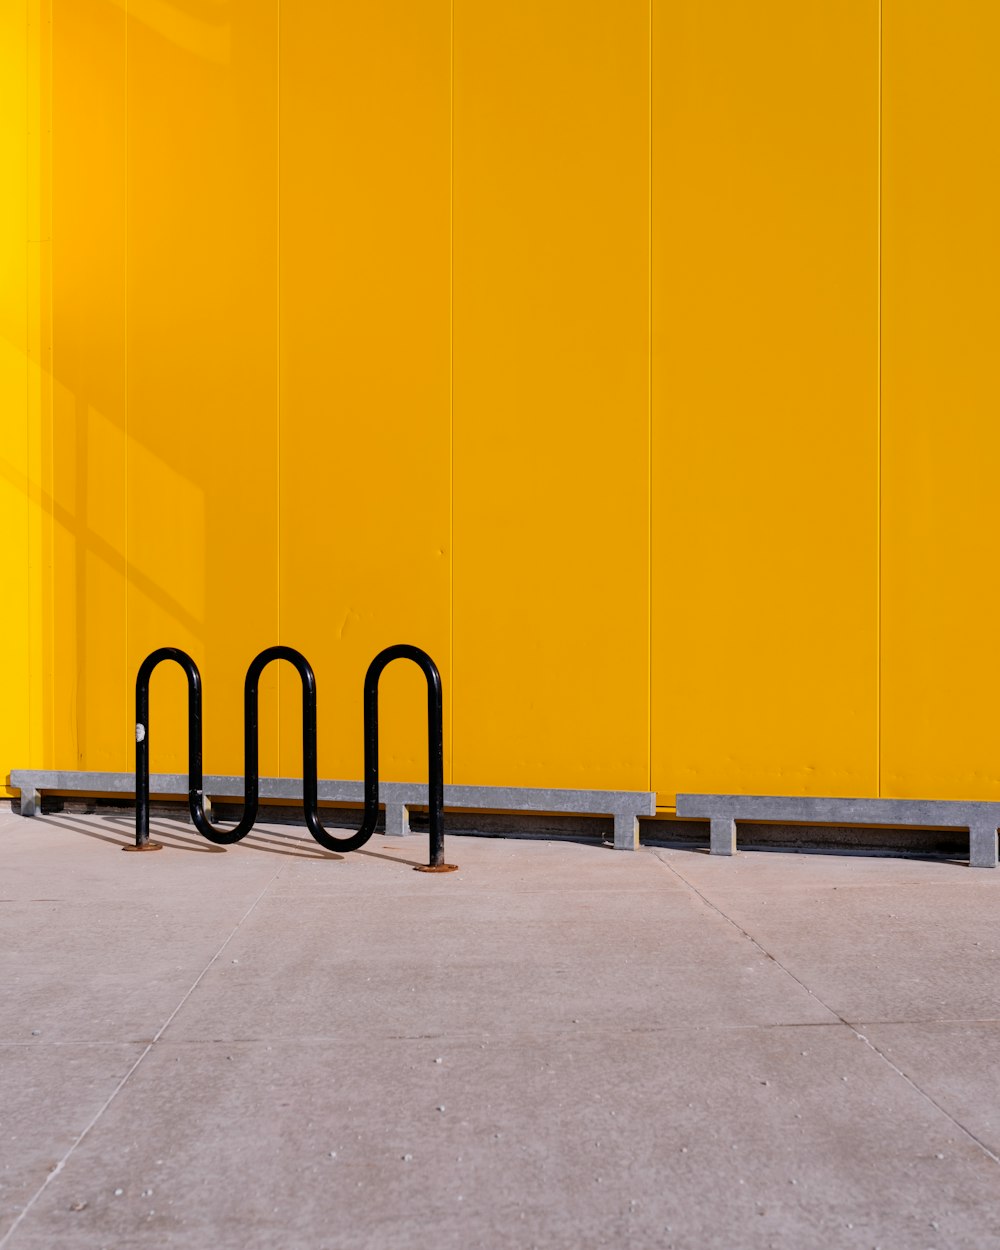 a yellow wall with three black bars on it